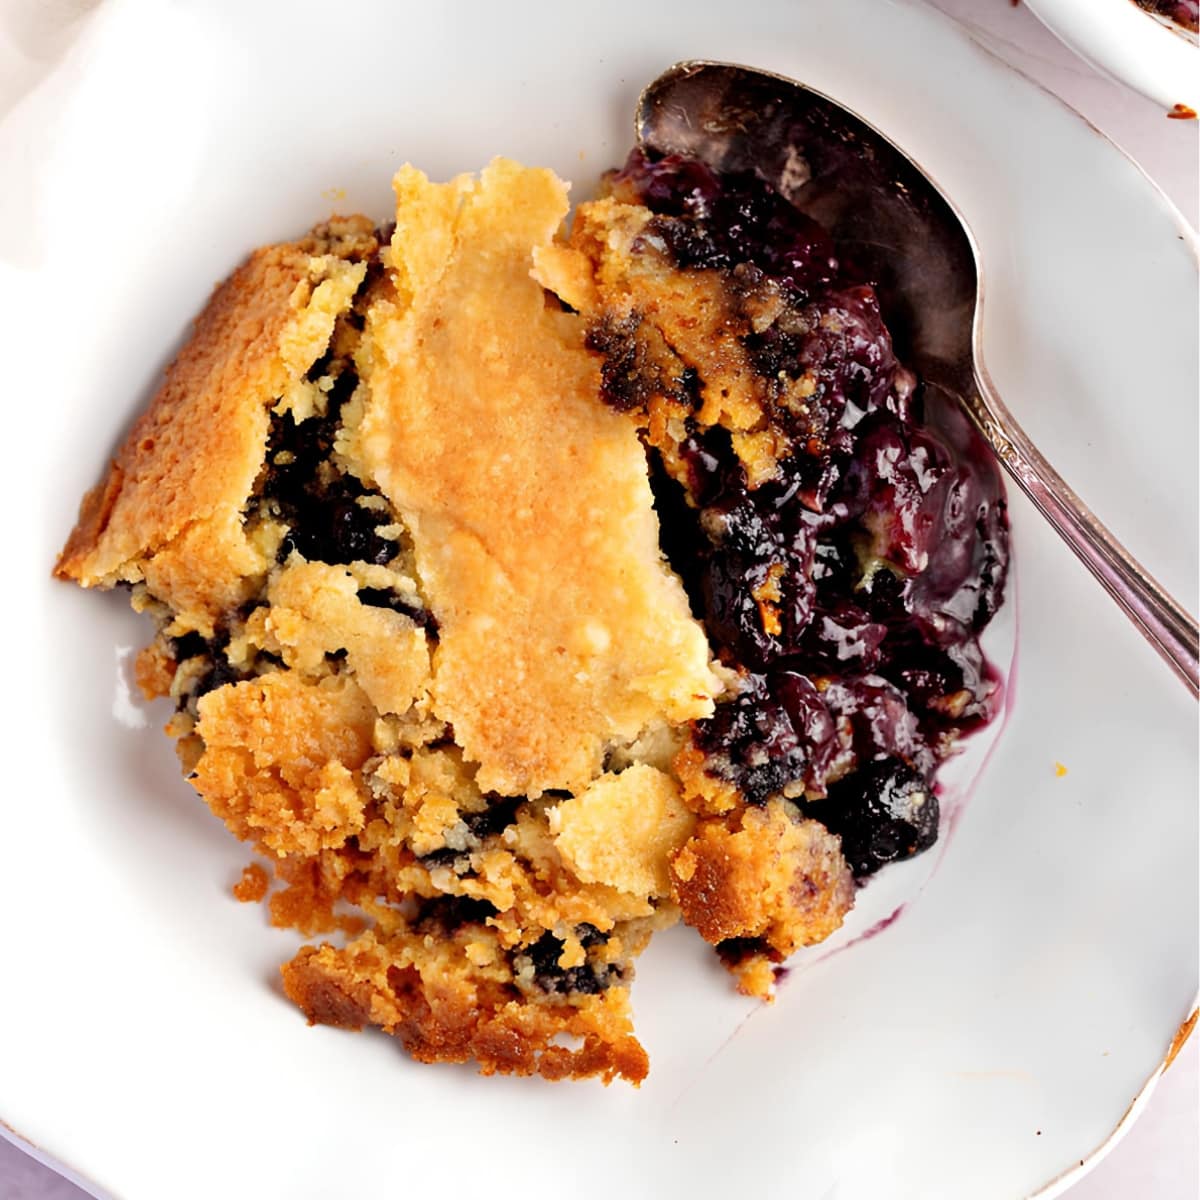 Blueberry dump cake with a spoon, a delicious dessert with a golden crust